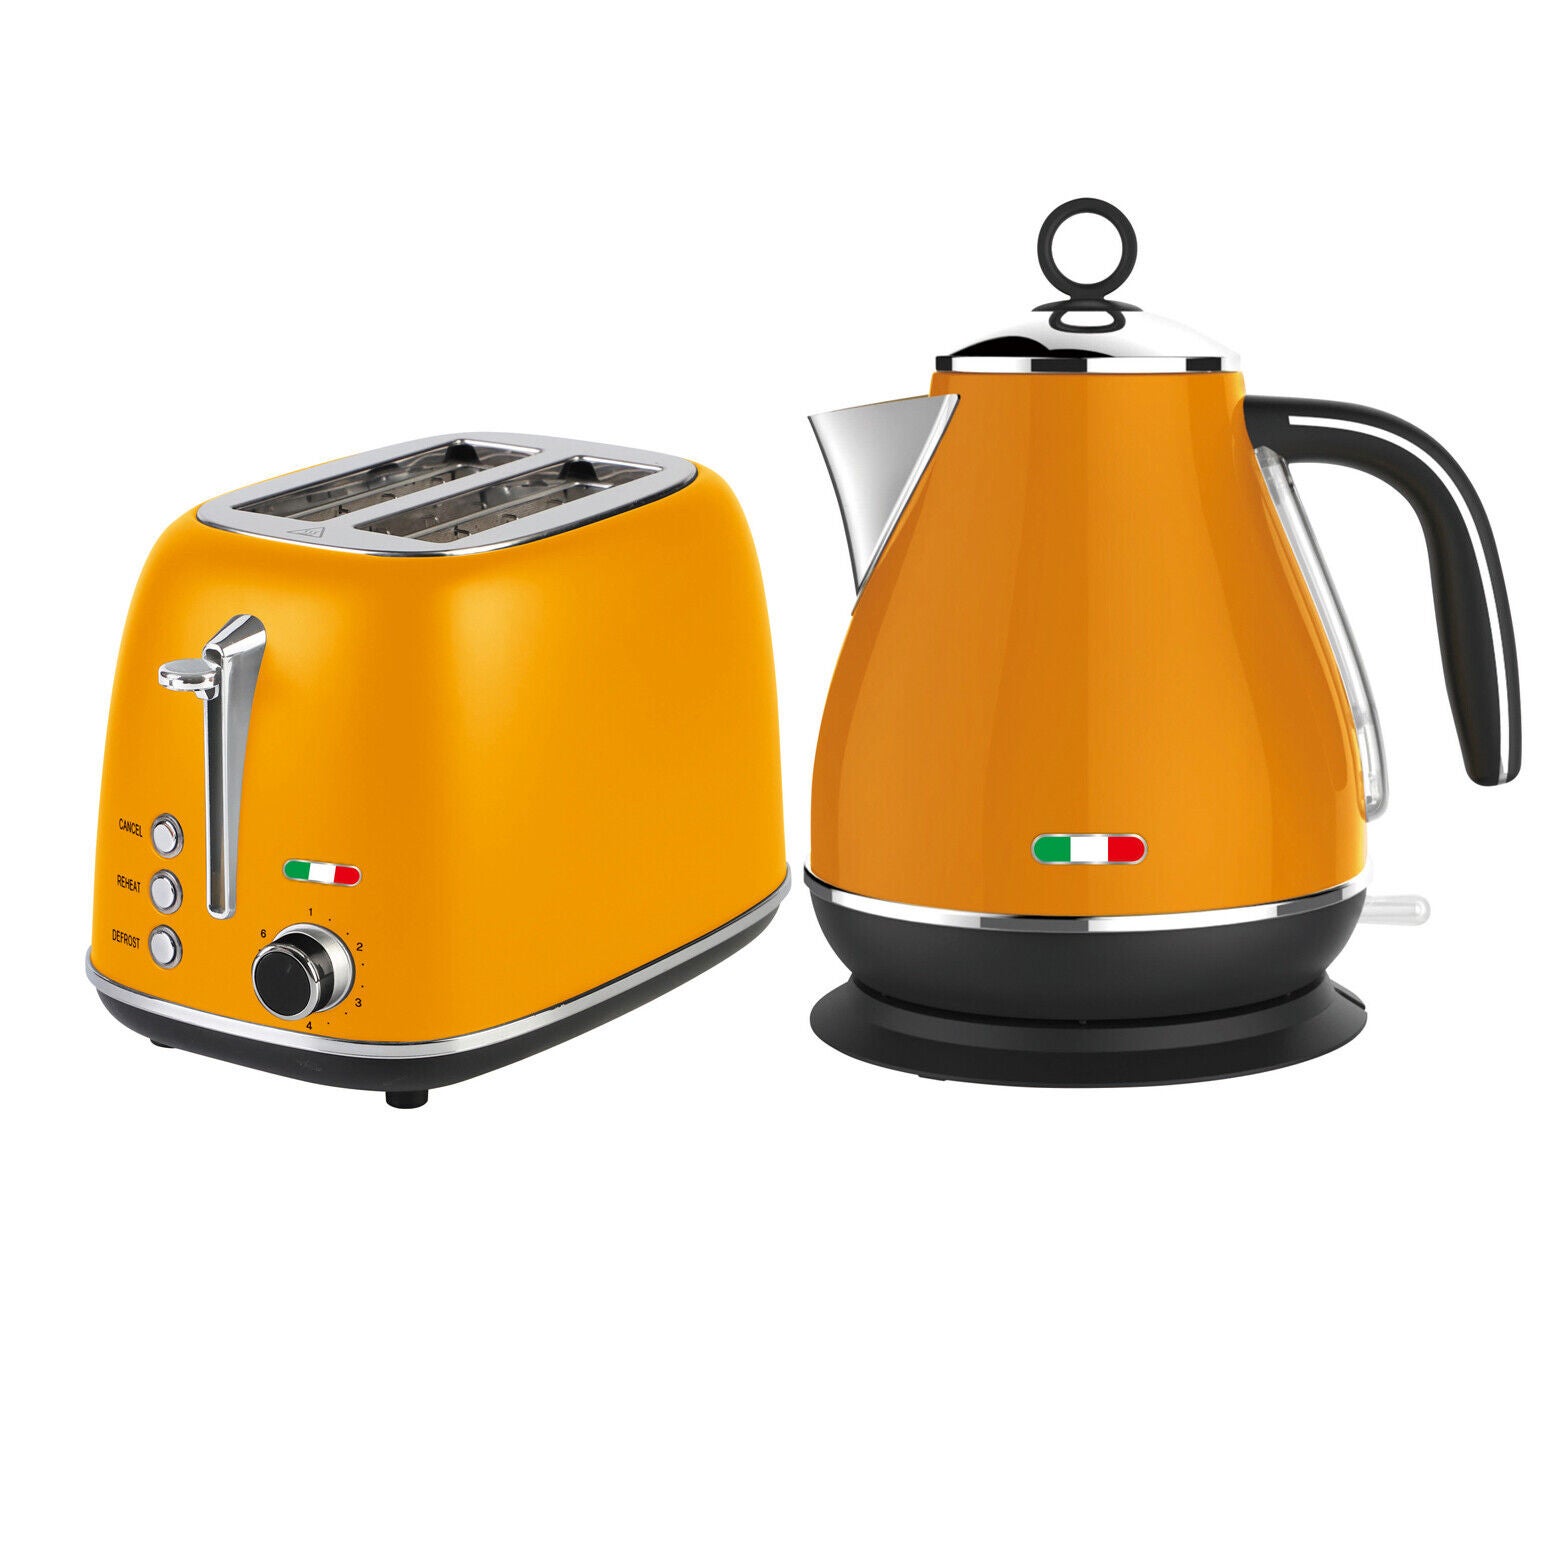 Vintage Electric Kettle and 2 Slice Toaster SET Combo Deal Stainless Steel Mango Orange